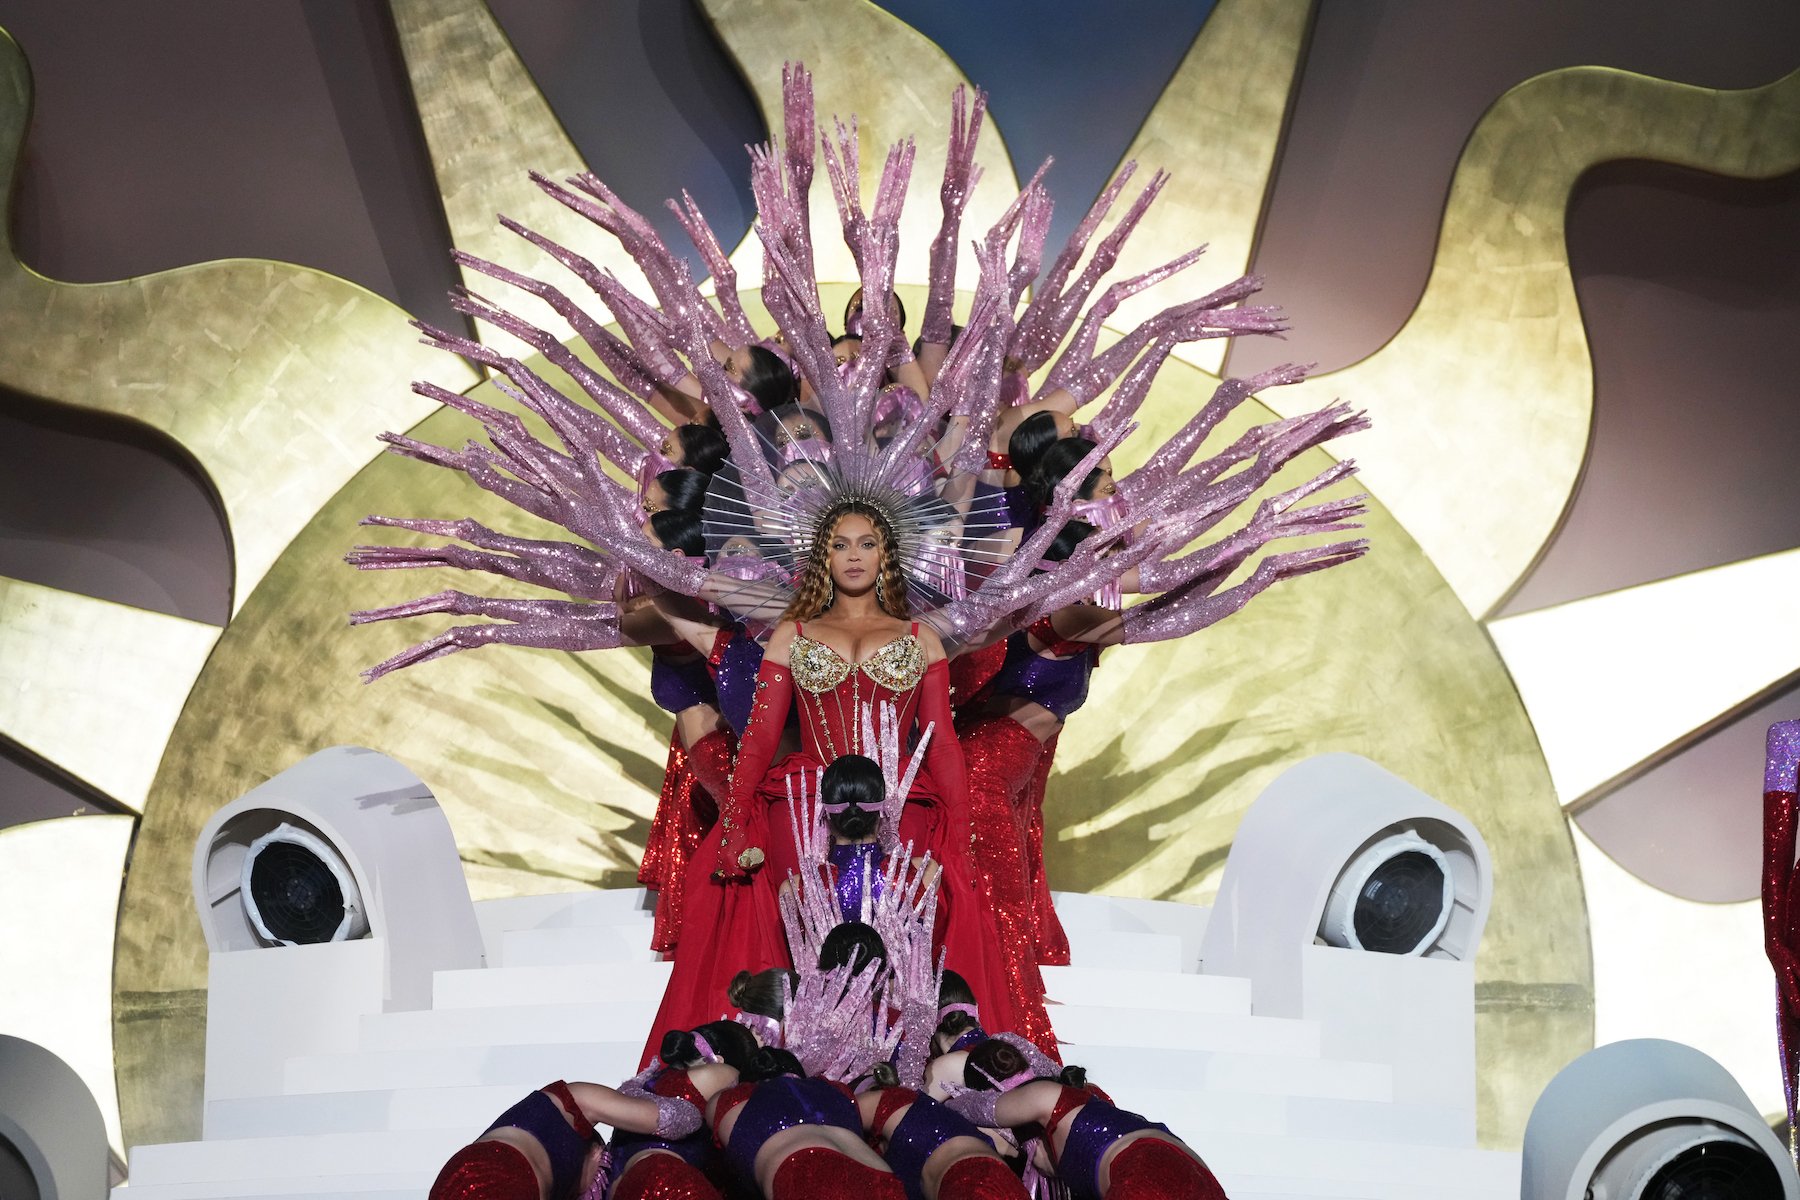 Beyoncé on stage at her Dubai performance, where she didn't perform anything from 'Renaissance'